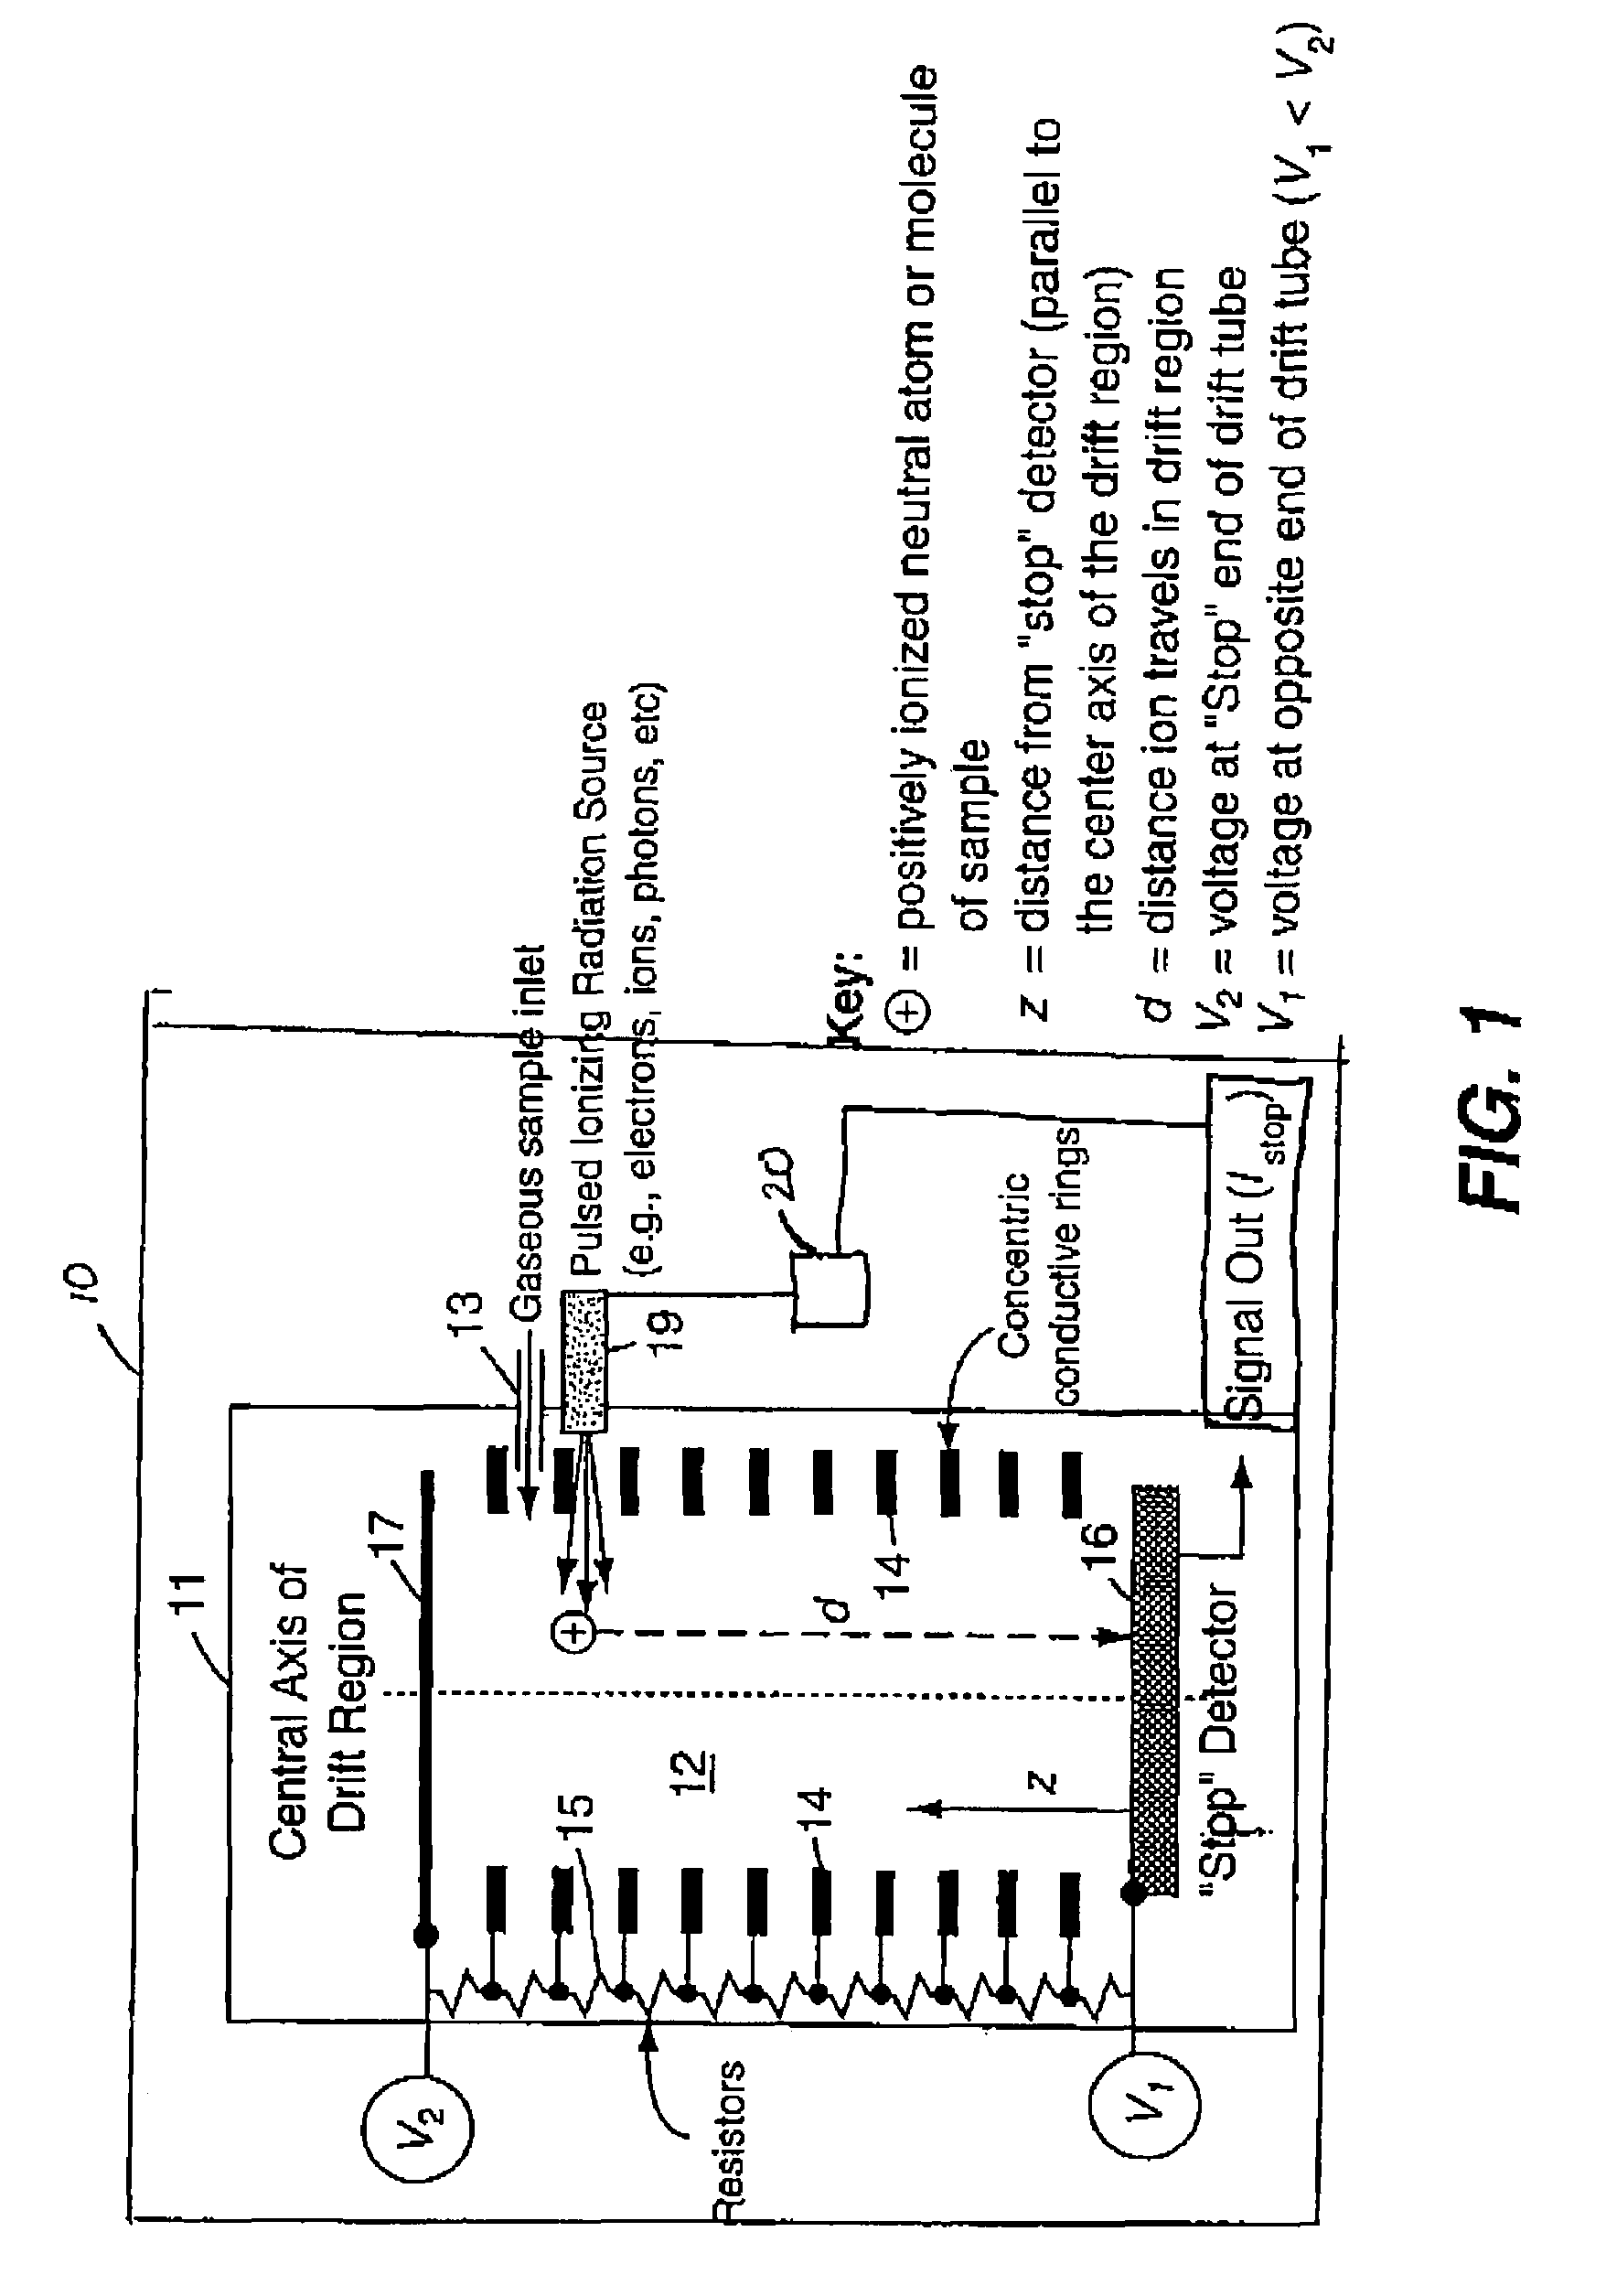 Linear electric field time-of-flight ion mass spectrometer